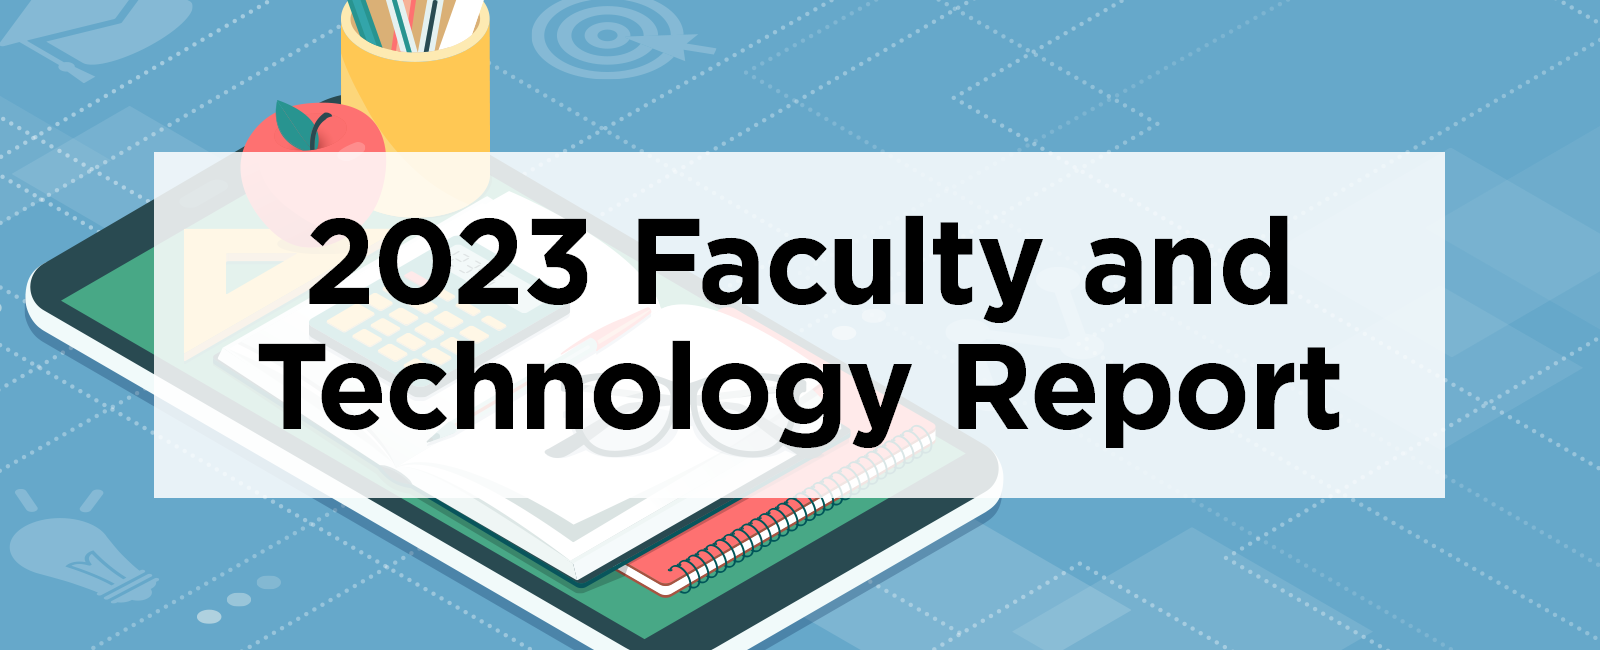 2023 Faculty and Technology Report